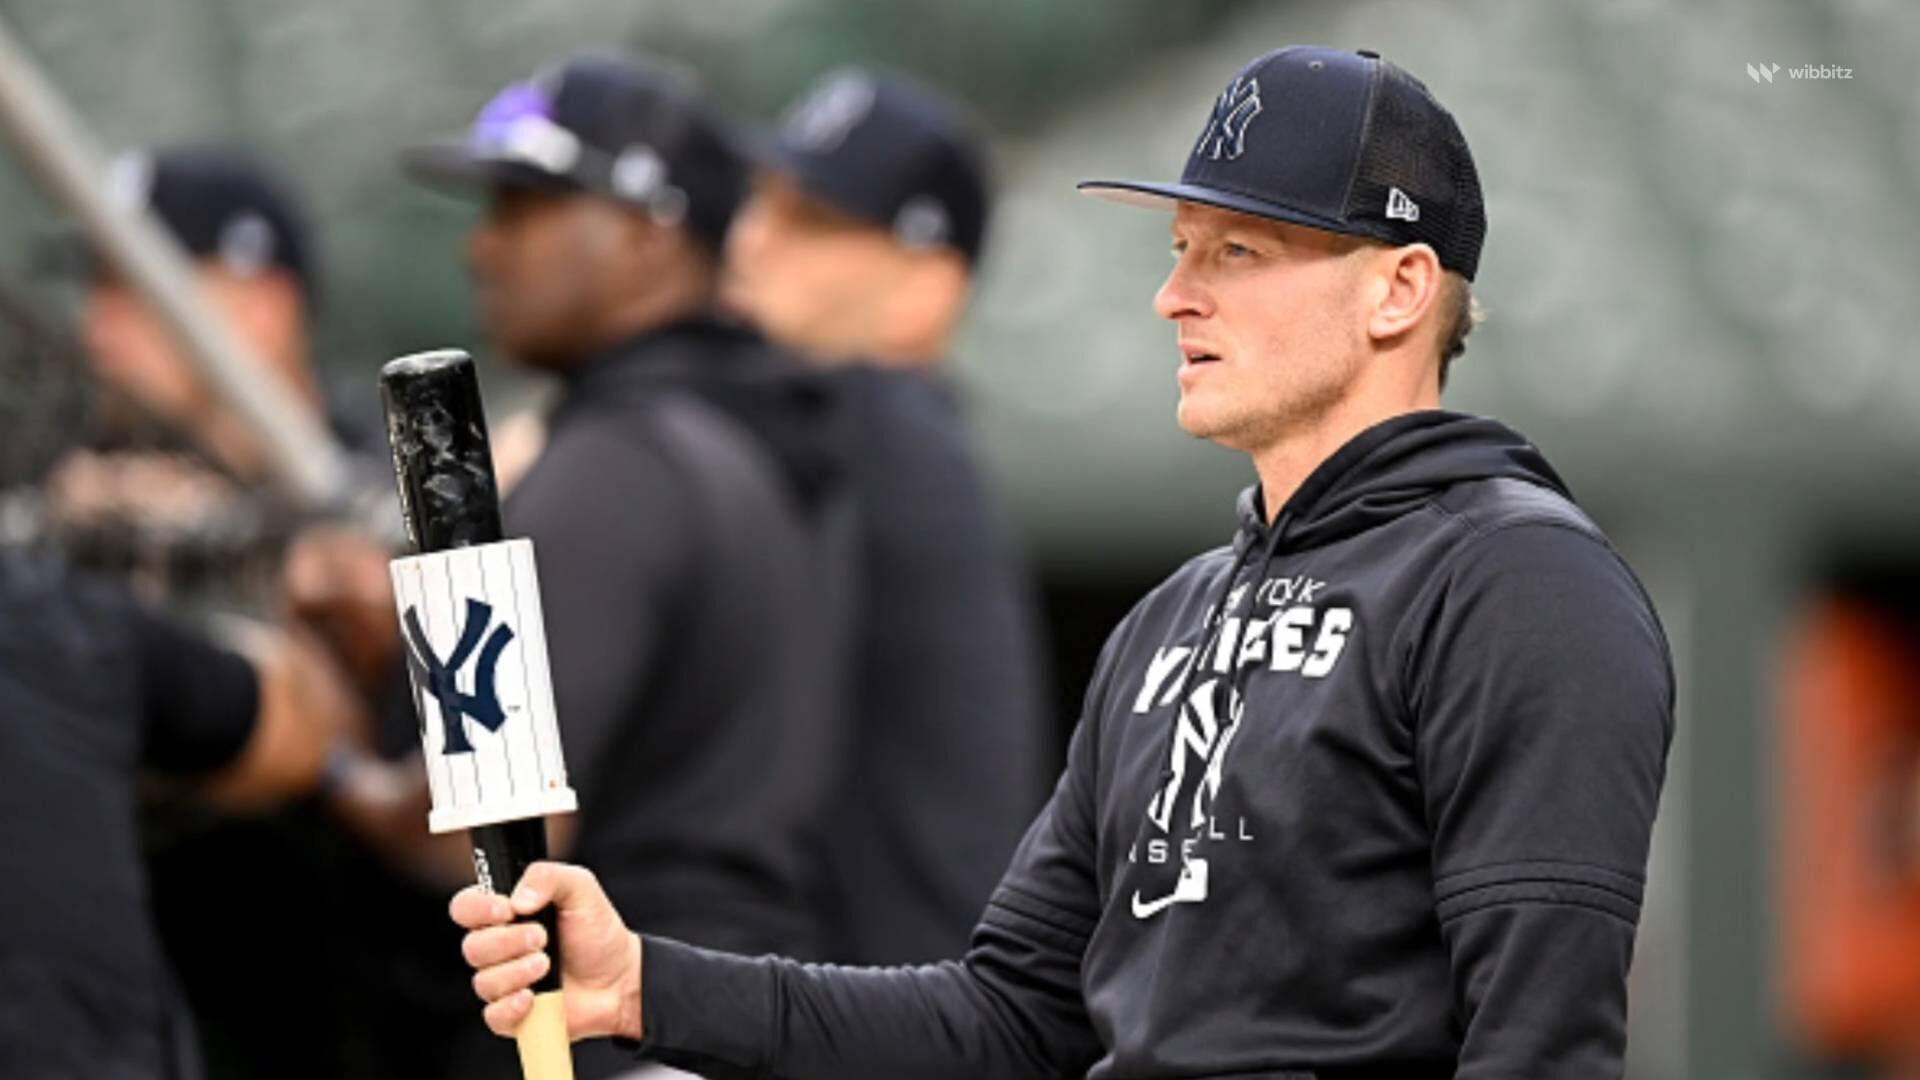 Josh Donaldson on being a Yankee, difficult childhood